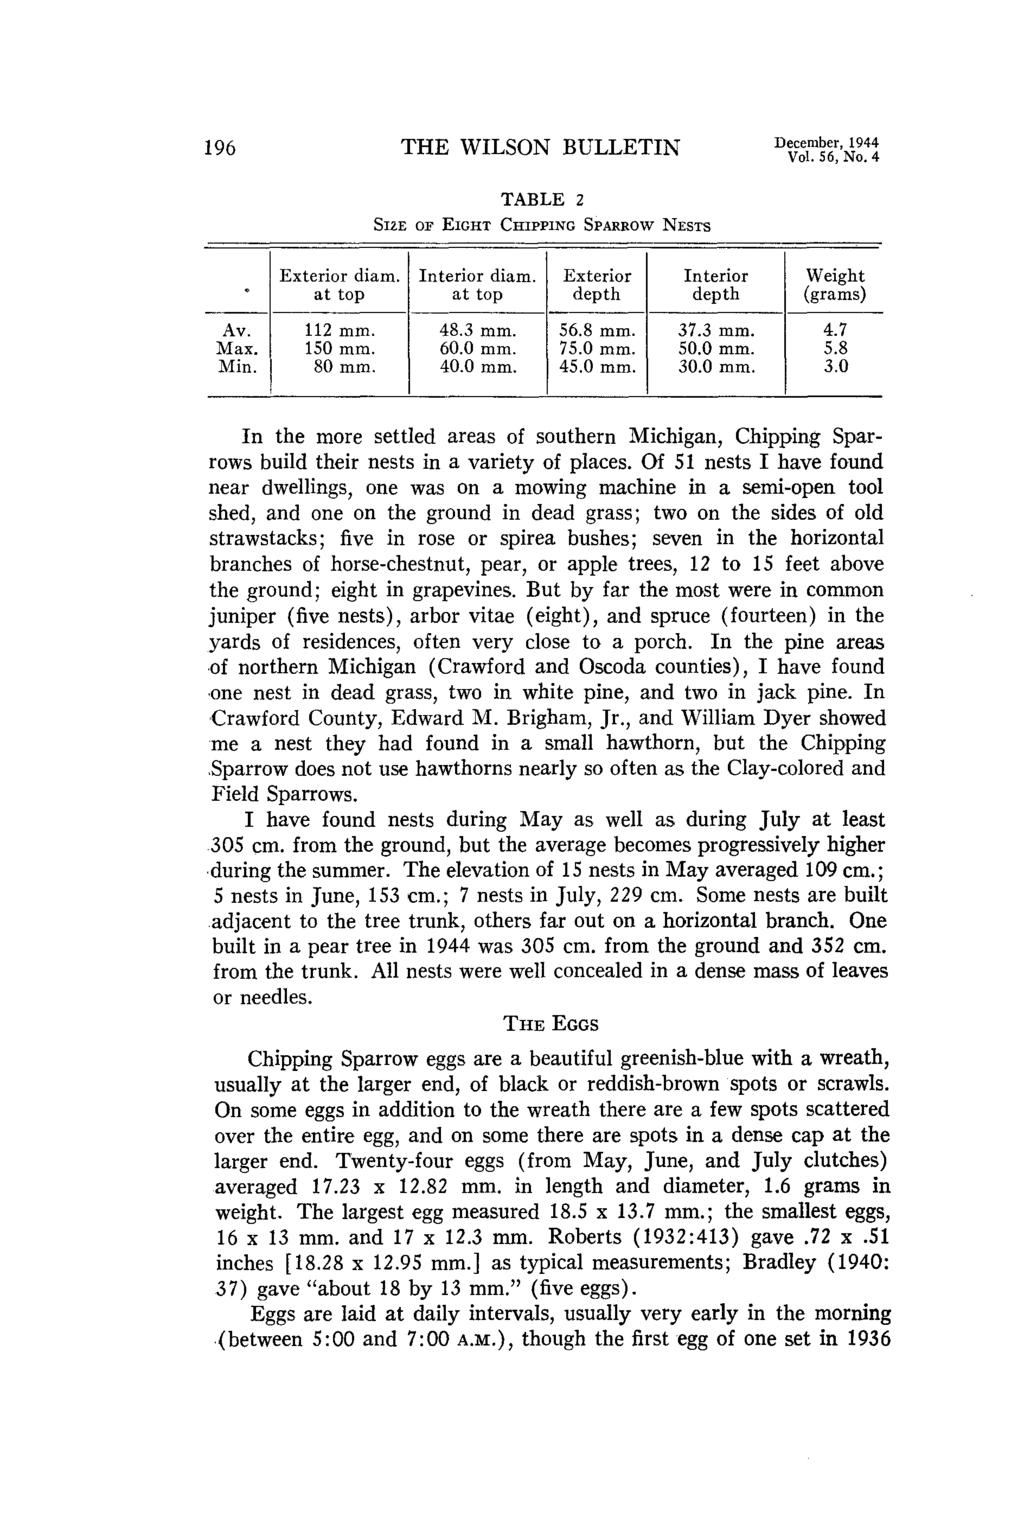 196 THE WILSON BULLETIN December, 1944 Vol. 56, No. 4 SIZE OF EIGHT TABLE 2 CHIPPING SPARROW NESTS Av. Max. Min. Exterior diam. Interior diam. Exterior at top at top depth - 112 mm. 48.3 mm. 56.8 mm.